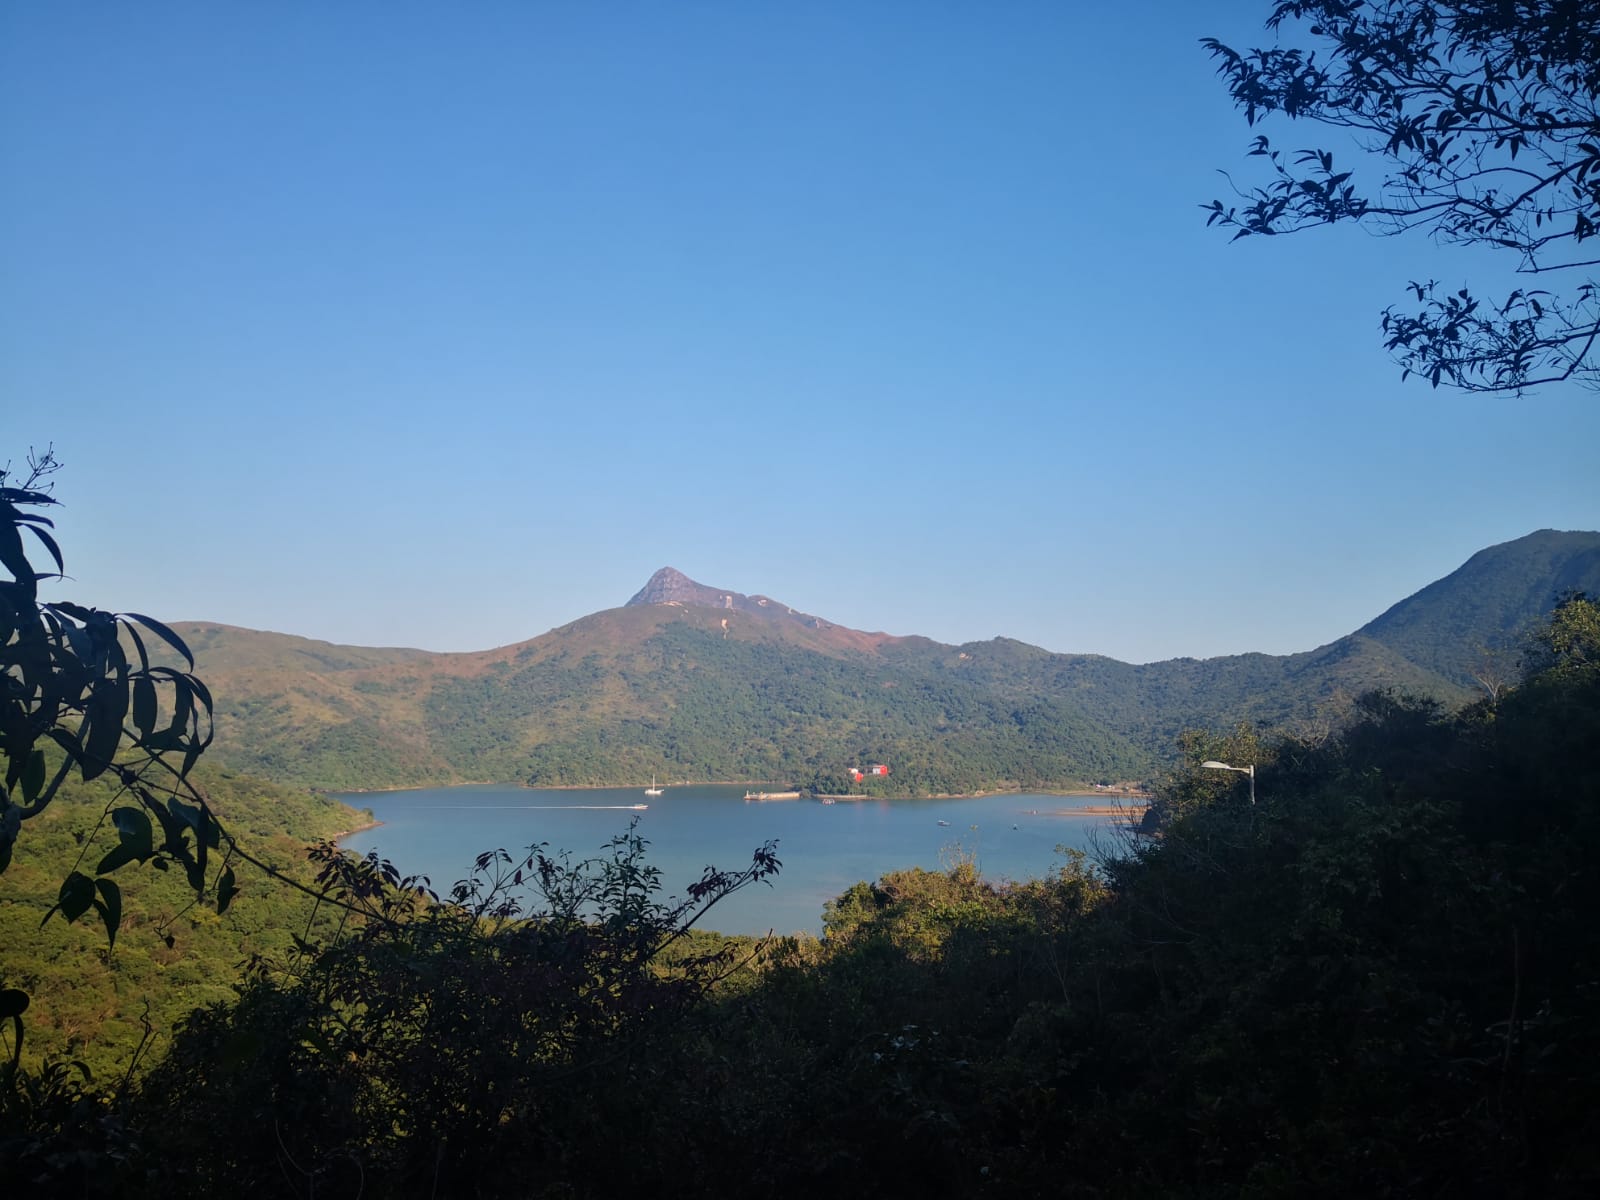 Maclehose trail section 2